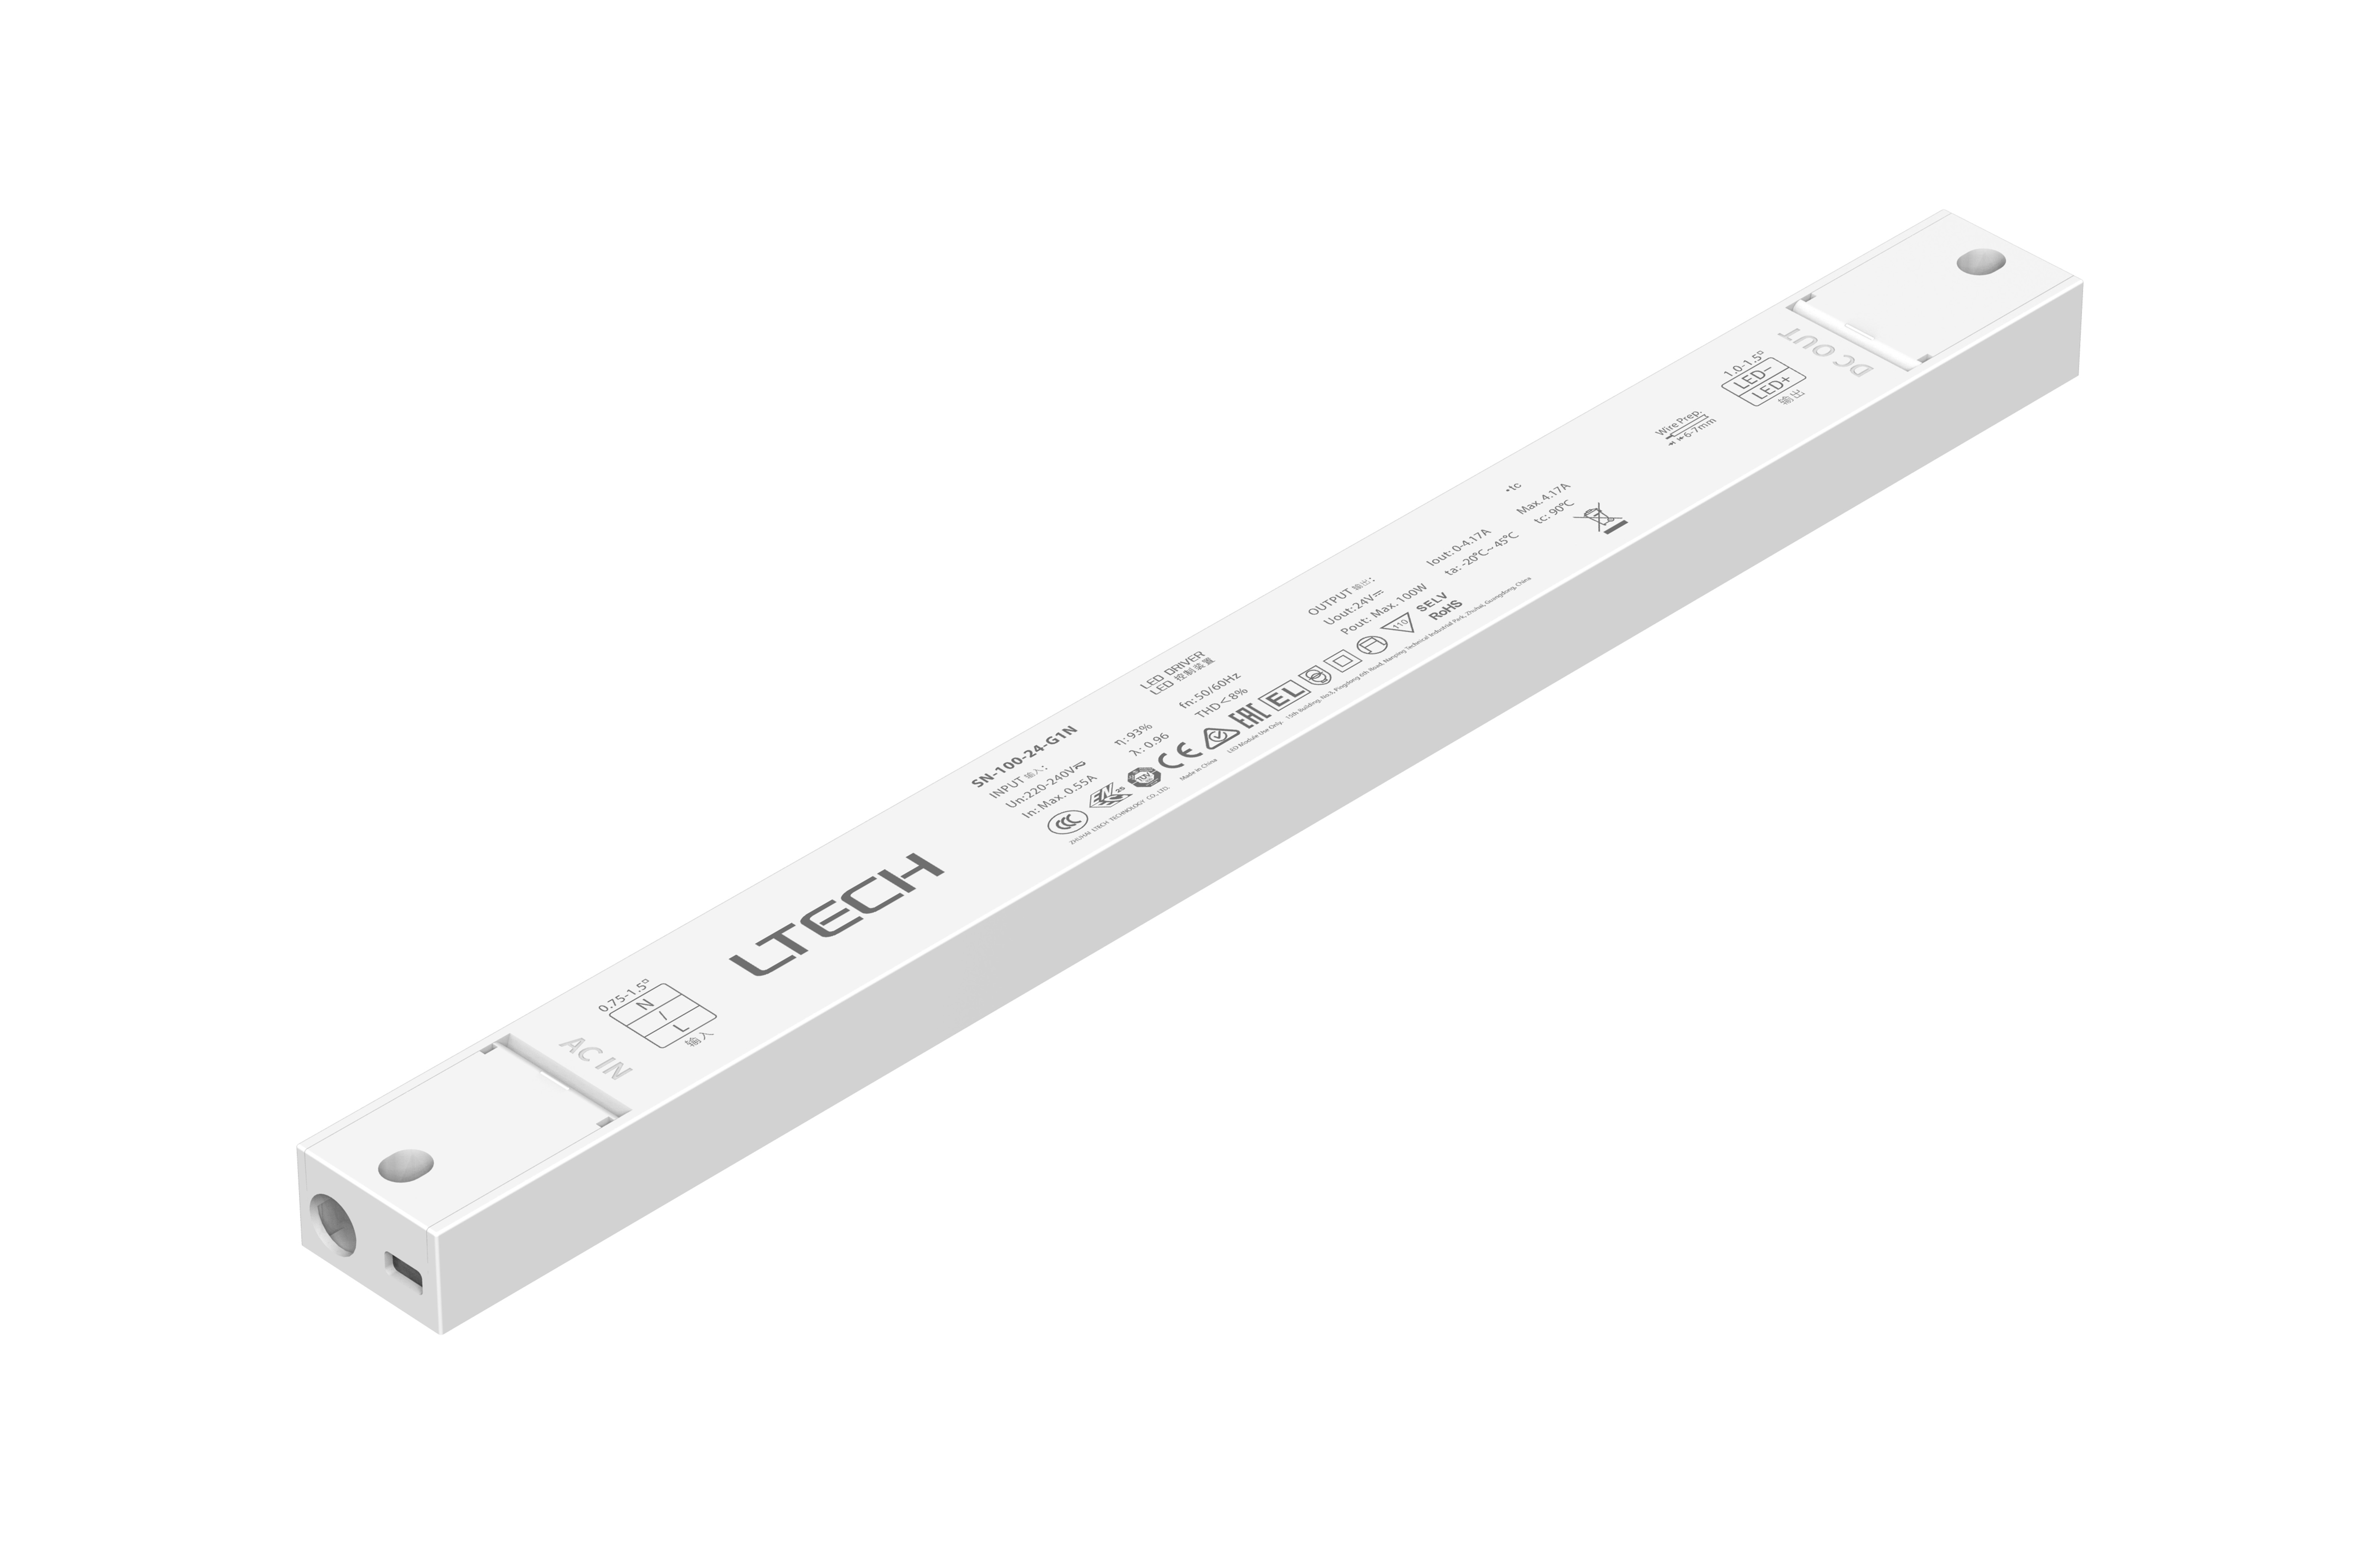 SN-100-24-G1N  Intelligent Constant Voltage  LED Driver; ON/OFF; 100W; 24VDC 4.17A ; 220-240Vac; IP20; 5yrs Warrenty.